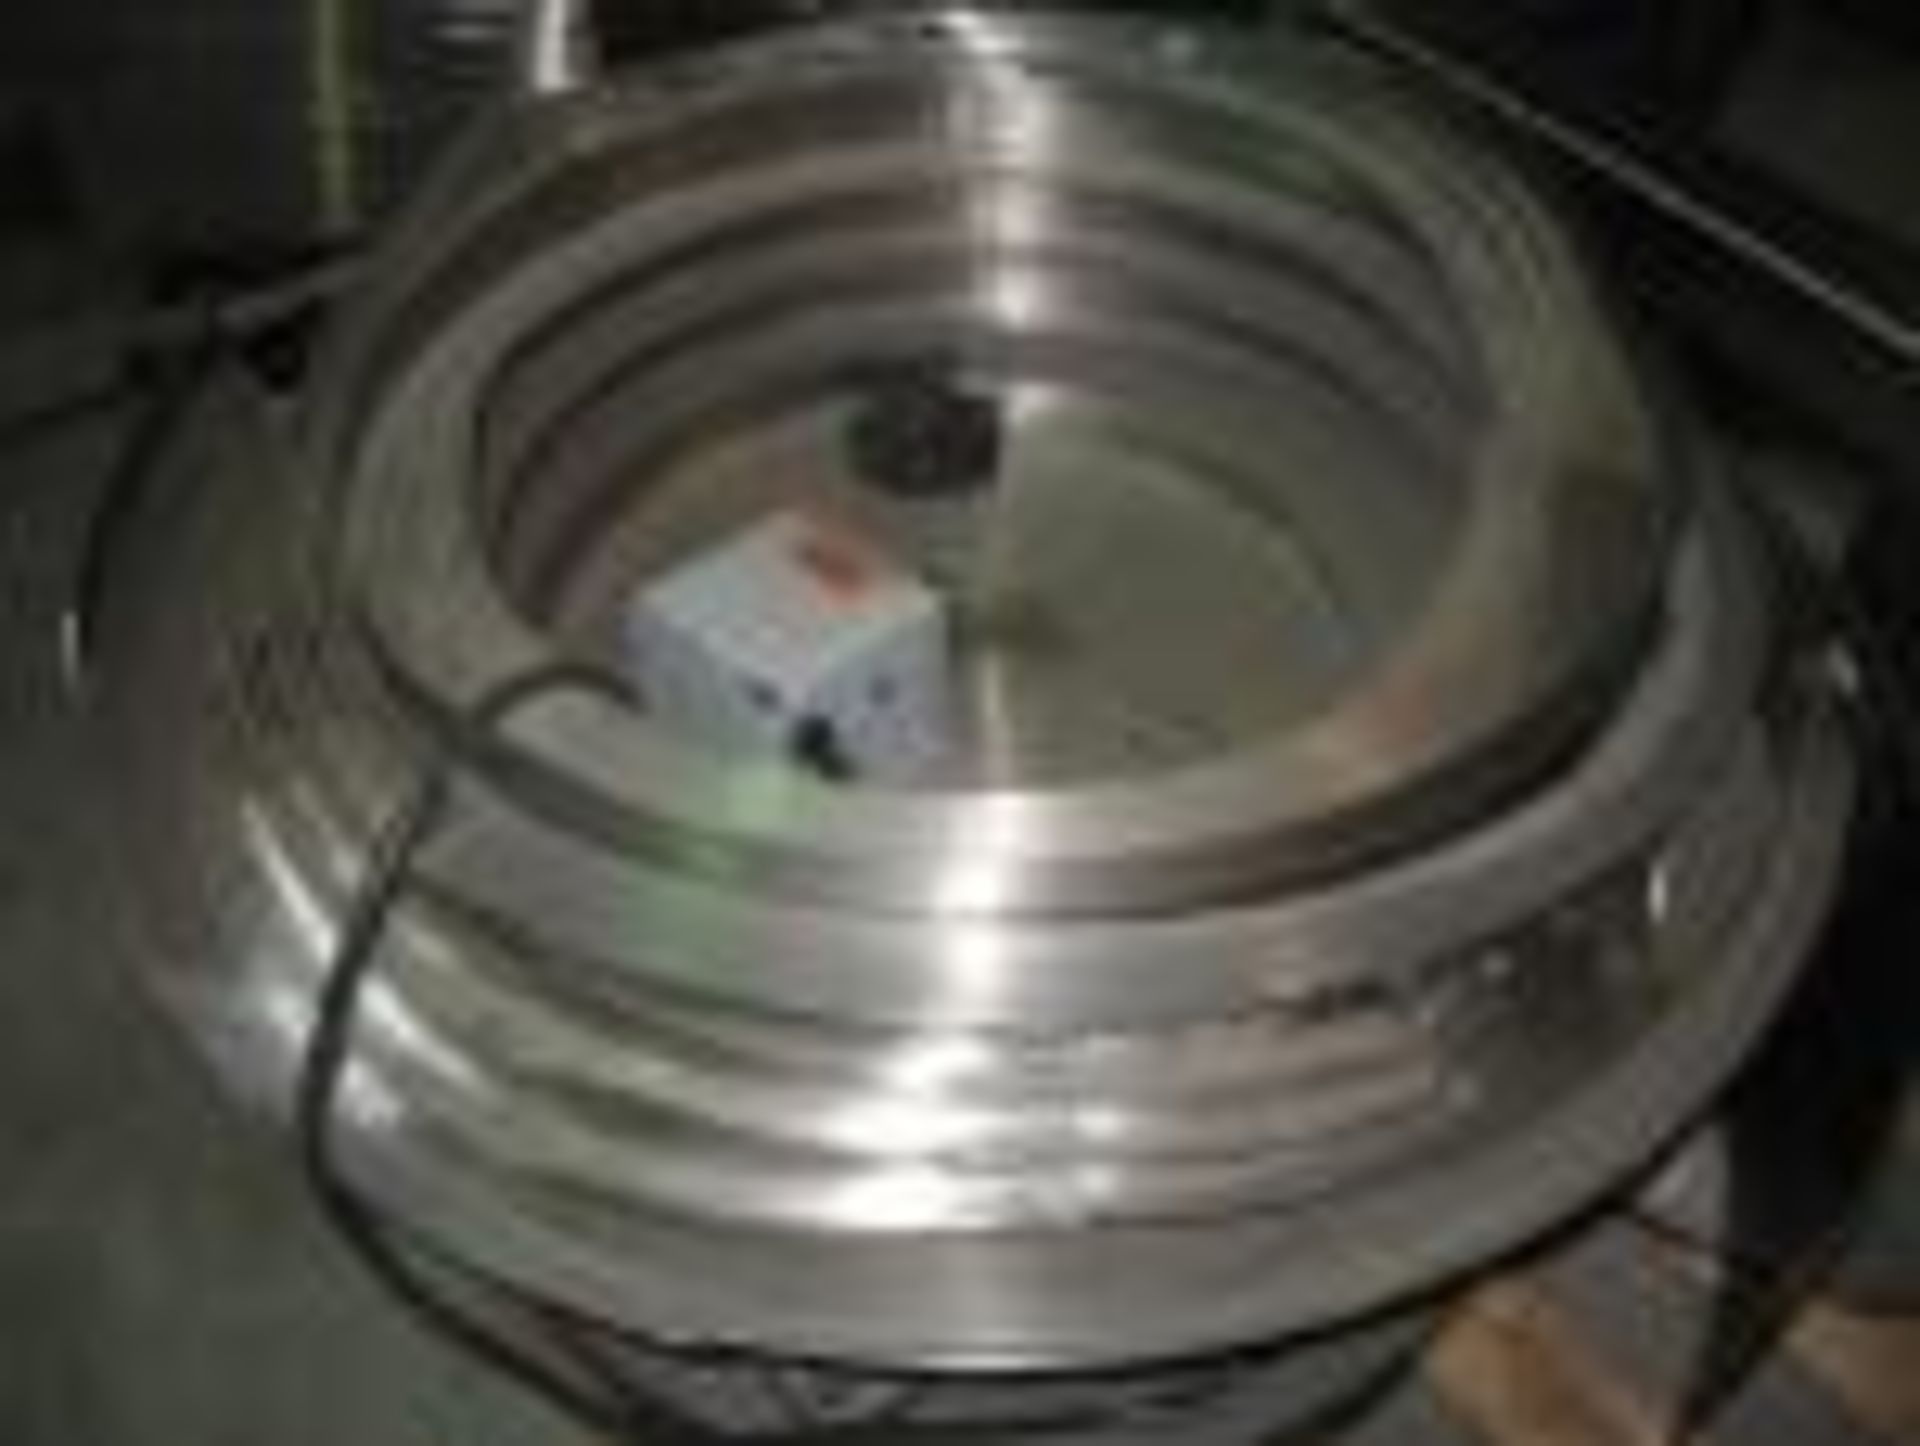 STAINLESS STEEL VIBRATORY BOWL 24 1/2" WITH 15AMP. 120 VAC, 50/60 HZ BOX, C/W LID AND STAND 28 1/